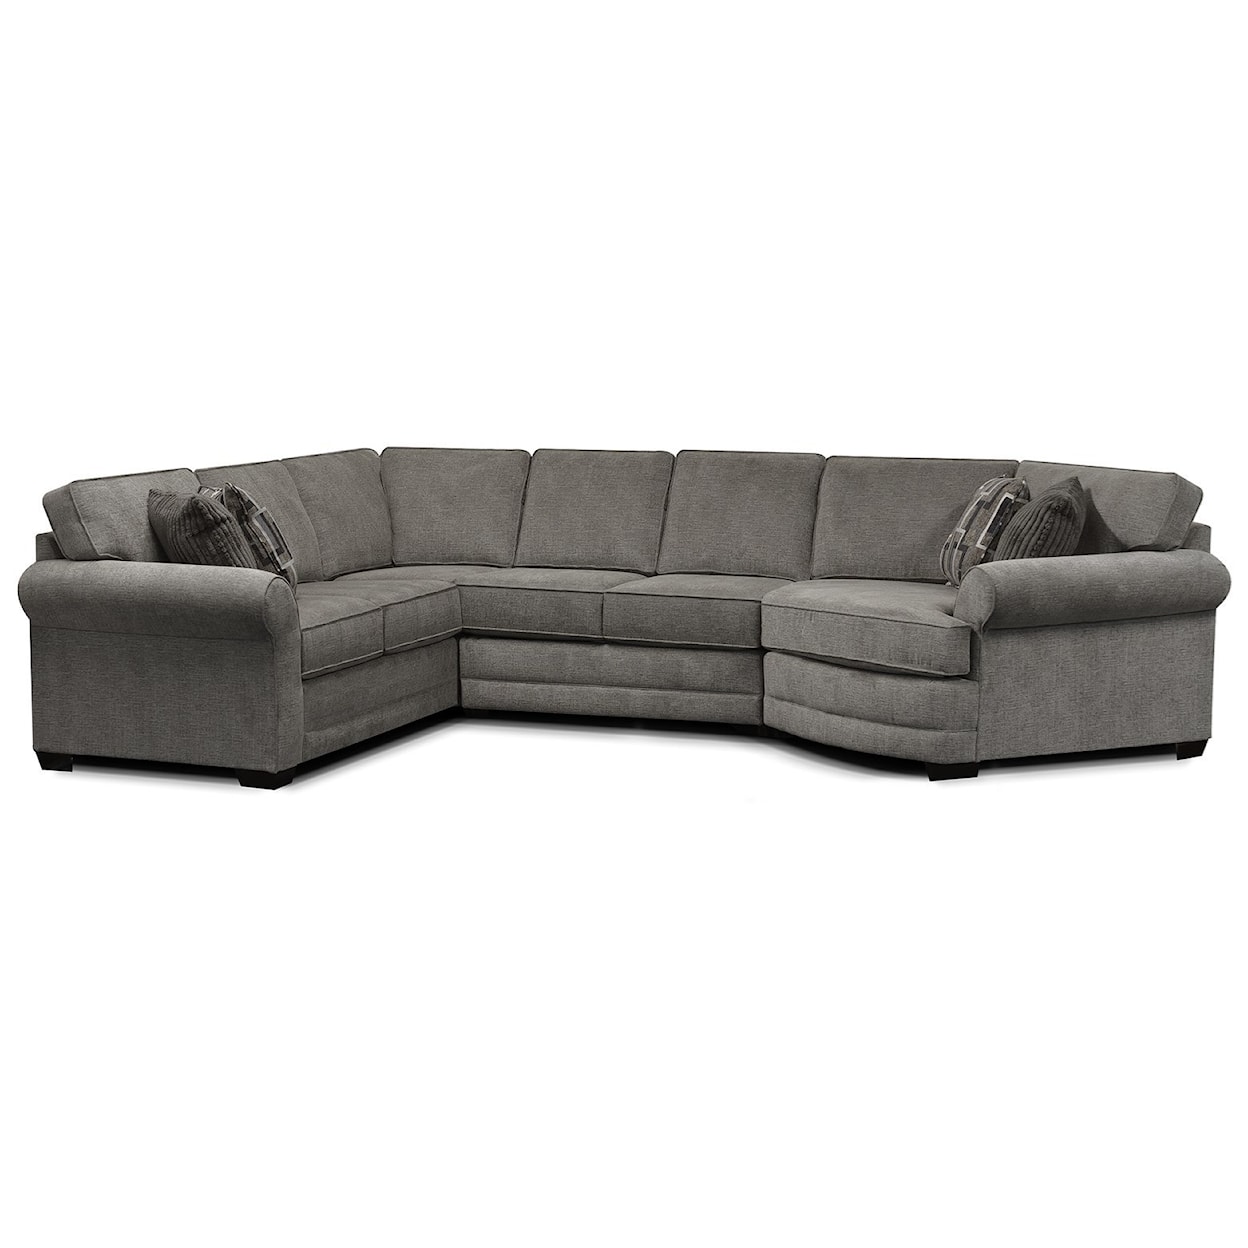 Dimensions 5630 Series 4-Piece Sectional Sofa Cuddler